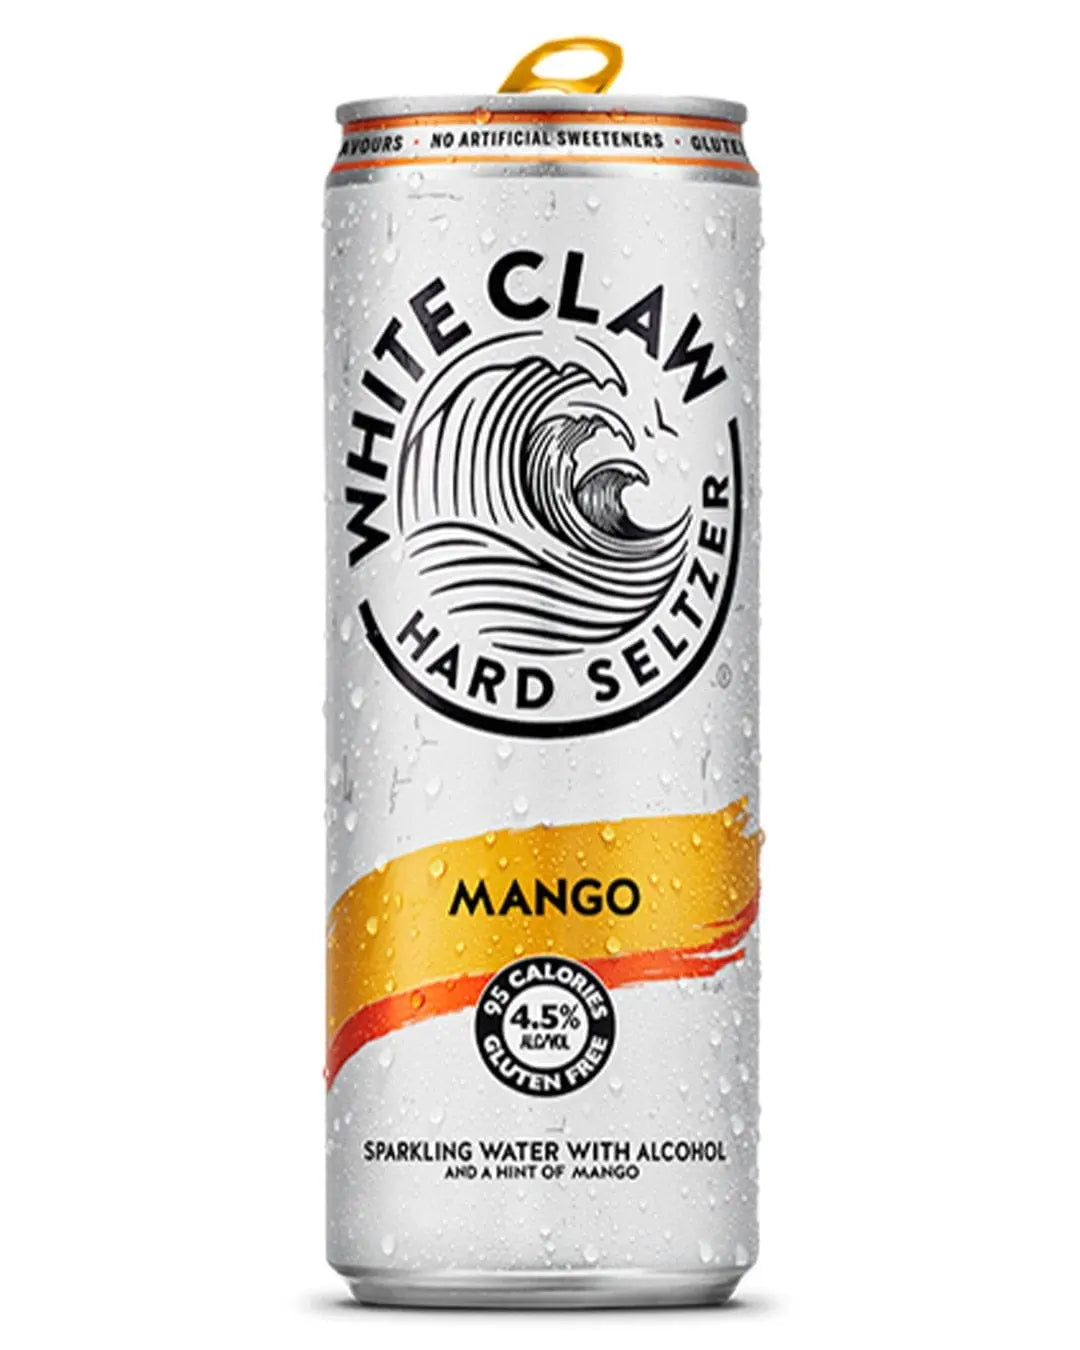 White Claw Mango Hard Seltzer Premixed Can, 330 ml Ready Made Cocktails